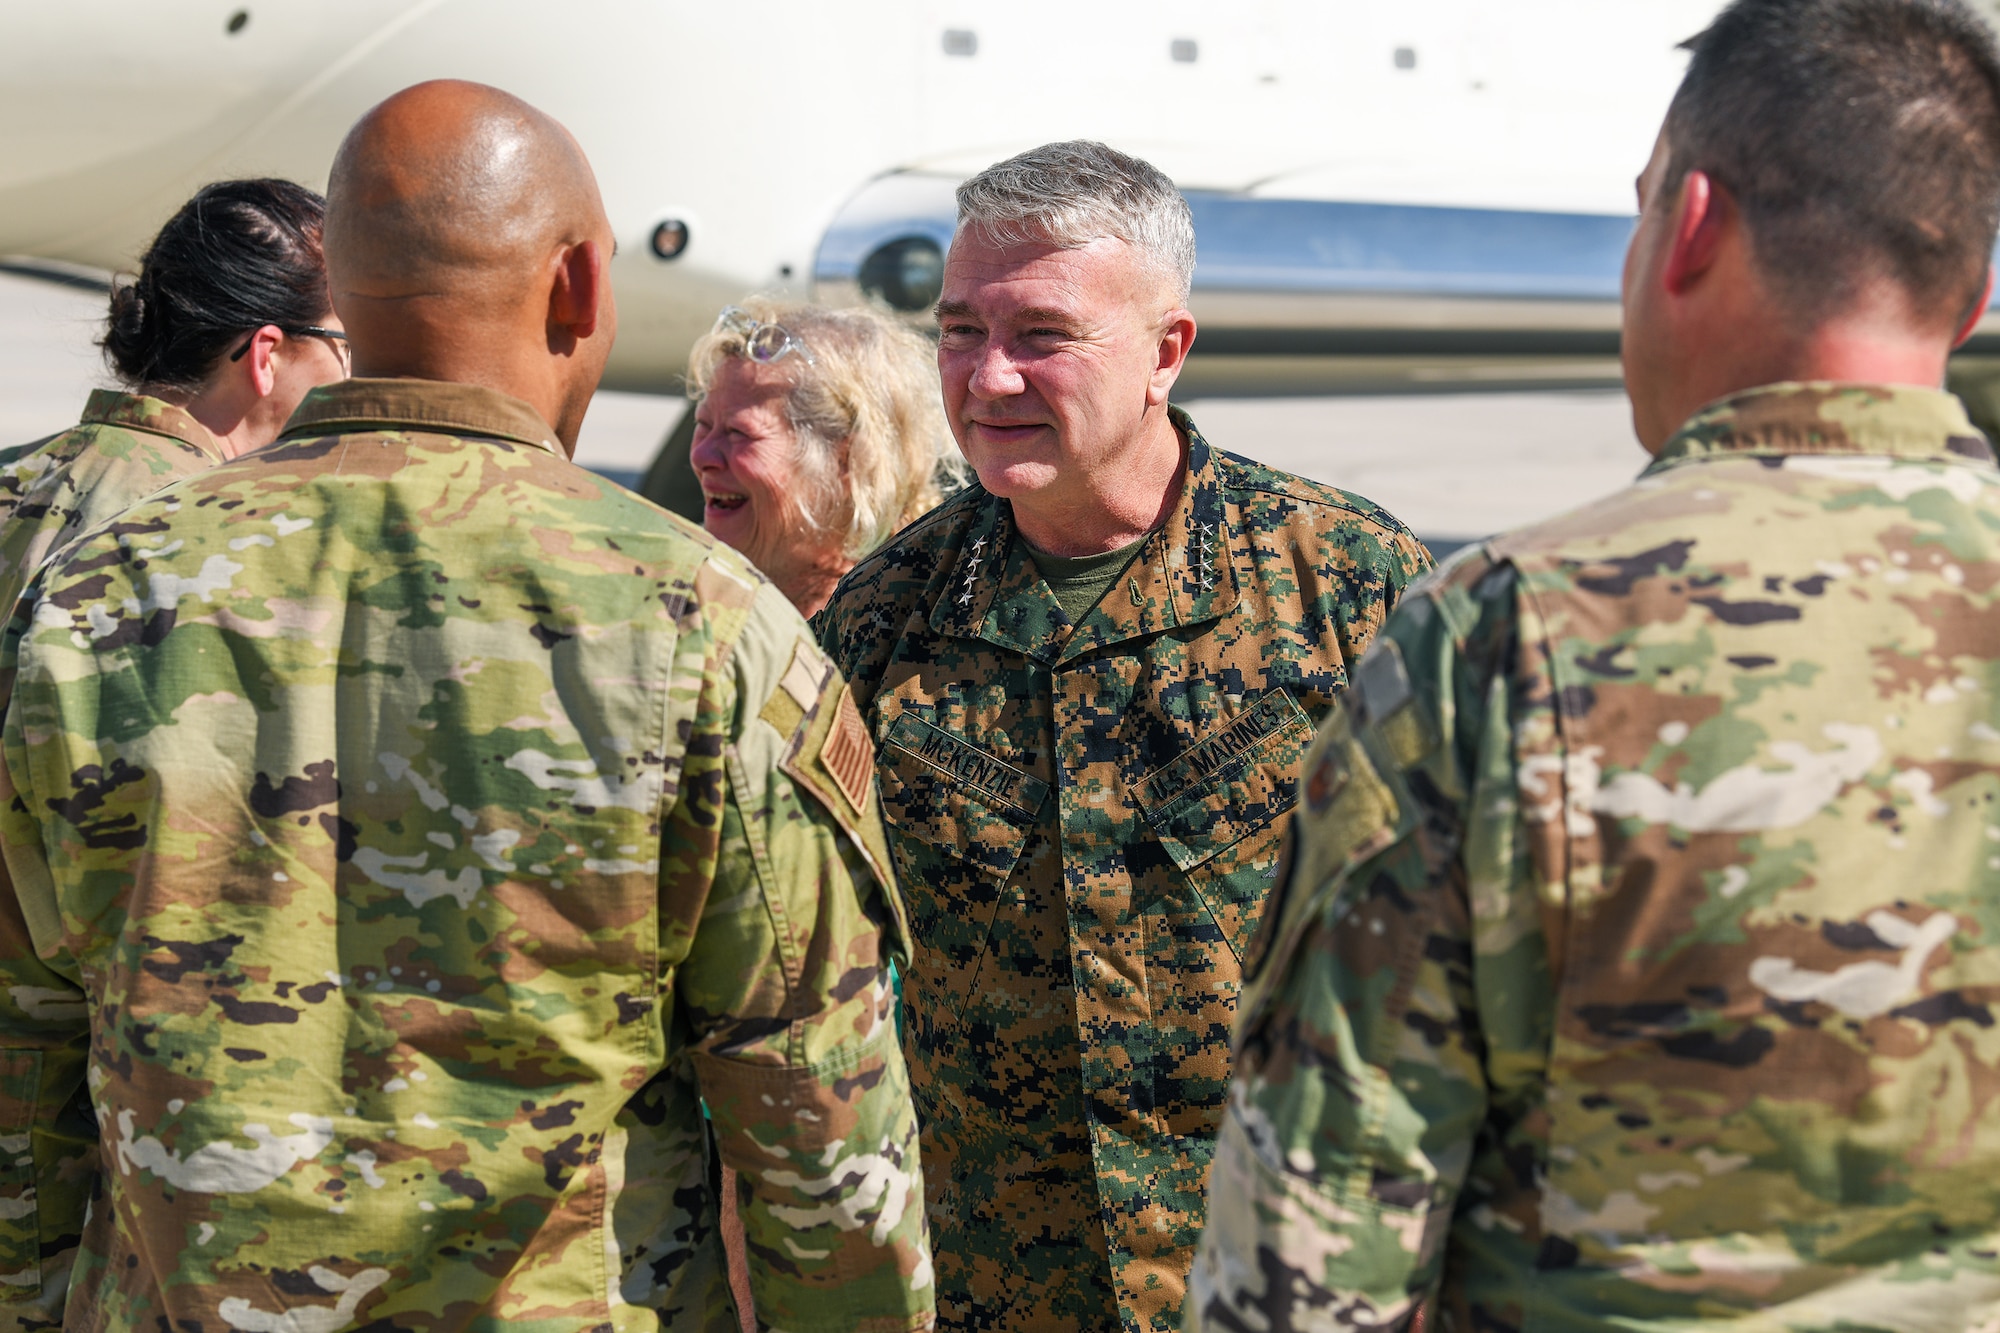 U.S. Air Force Chief Master Sgt. Byron Phillips, the Buckley Garrison acting command chief, greets U.S. Marine Corps Gen. Kenneth F. McKenzie Jr., the U.S. Central Command commander, July 27, 2021, on the flightline at Buckley Space Force Base, Colo.